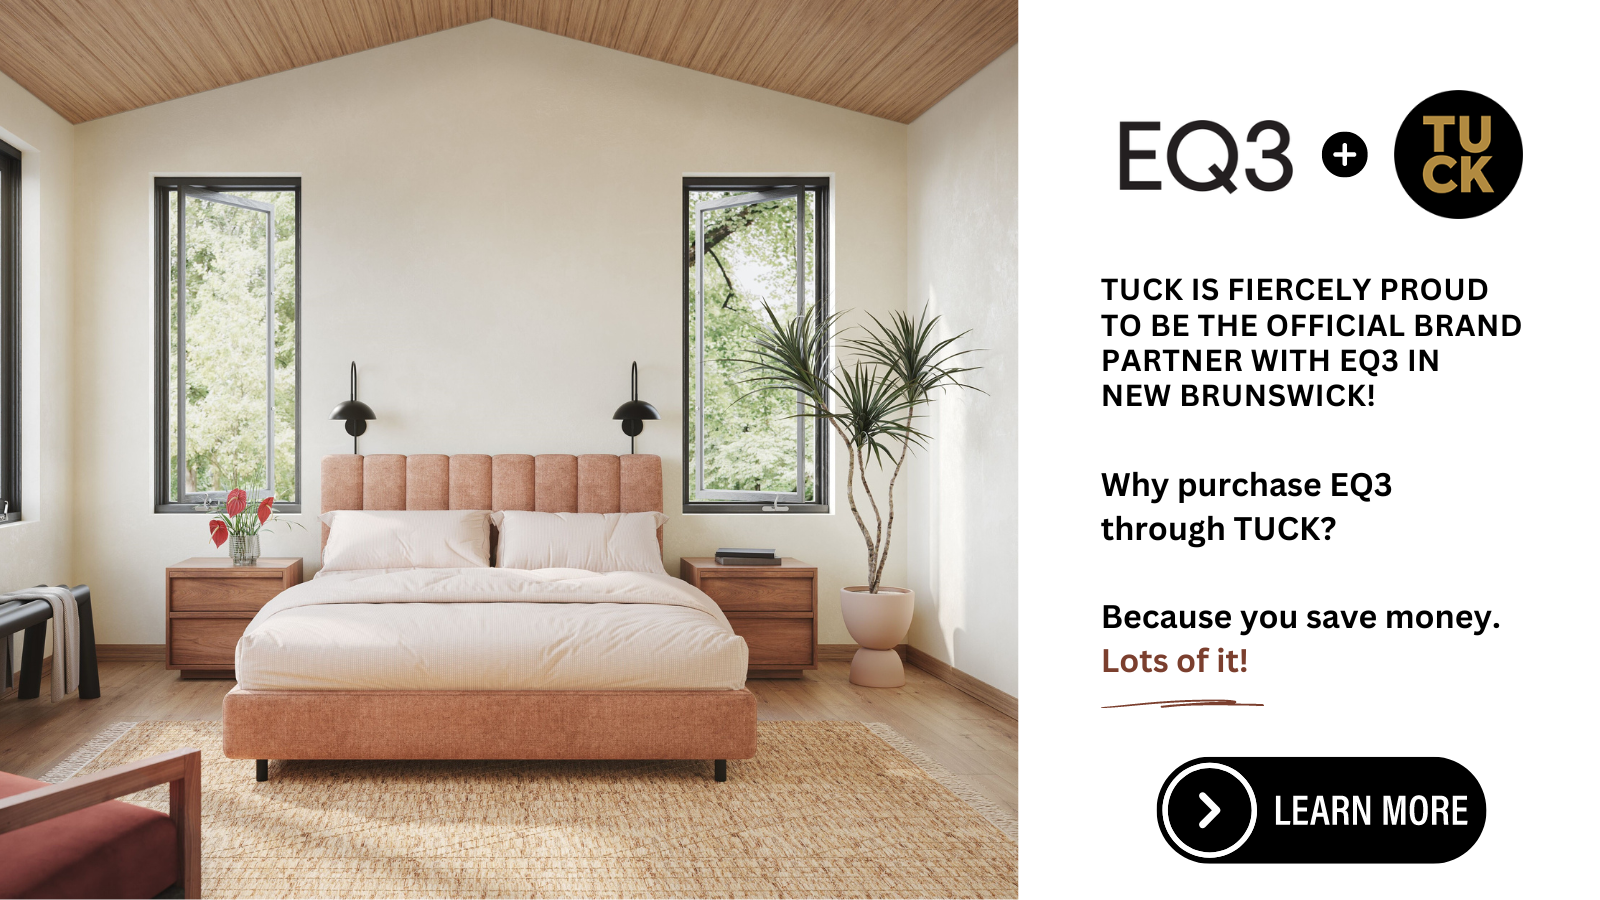 Purchase your EQ3 Bed through Tuck & Save Money!